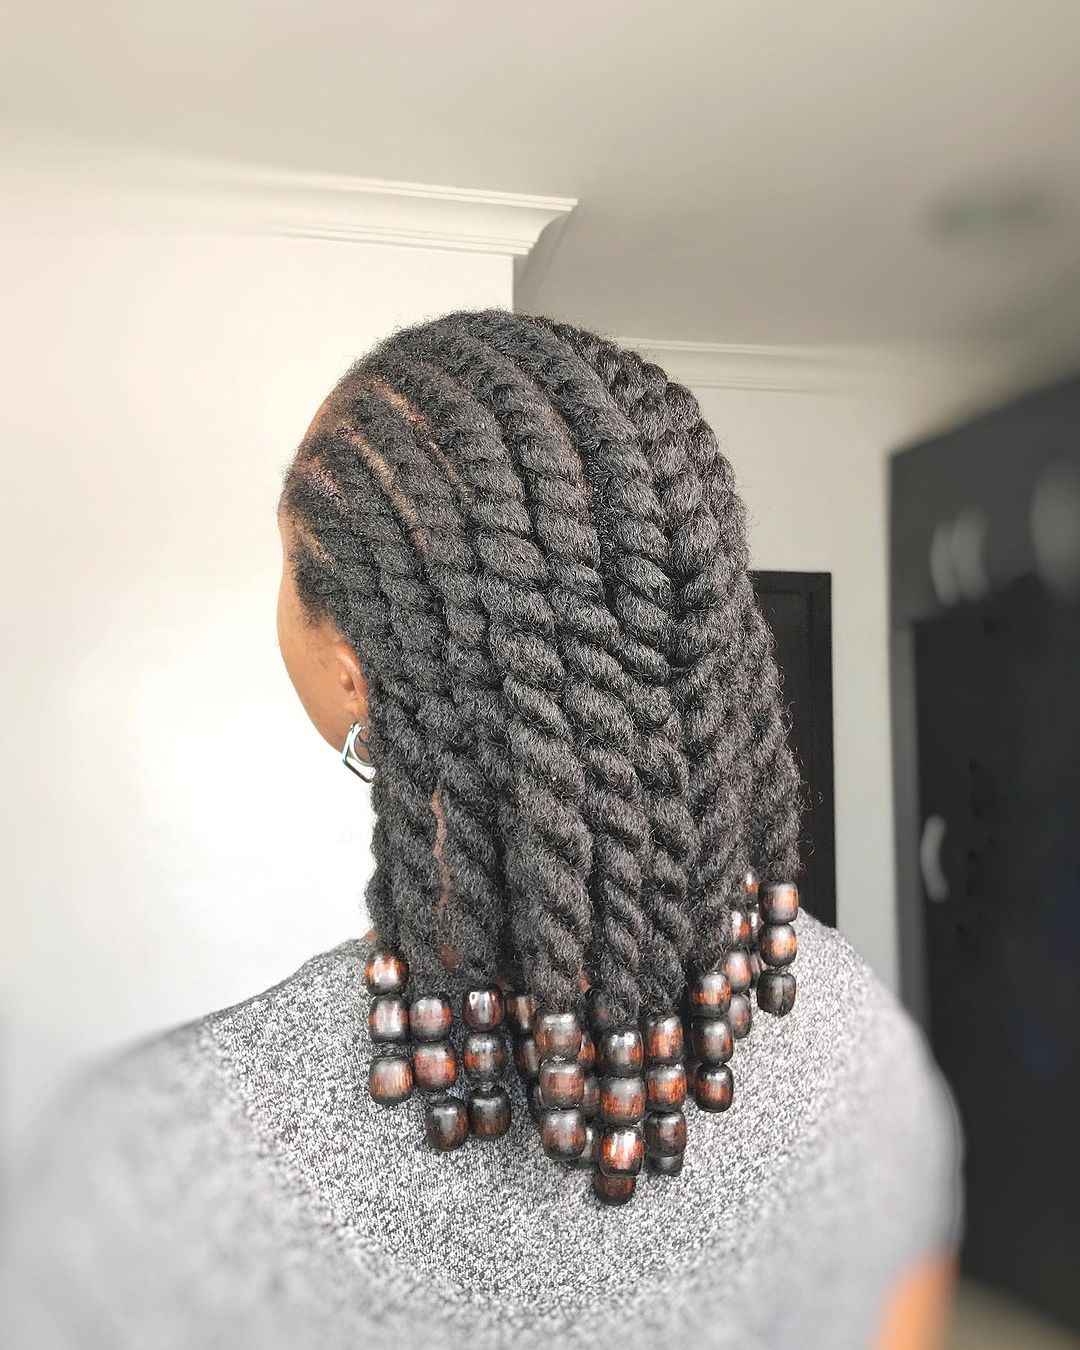 10. Chunky Flat Twist Weave And Individual Twists With Beads at The End